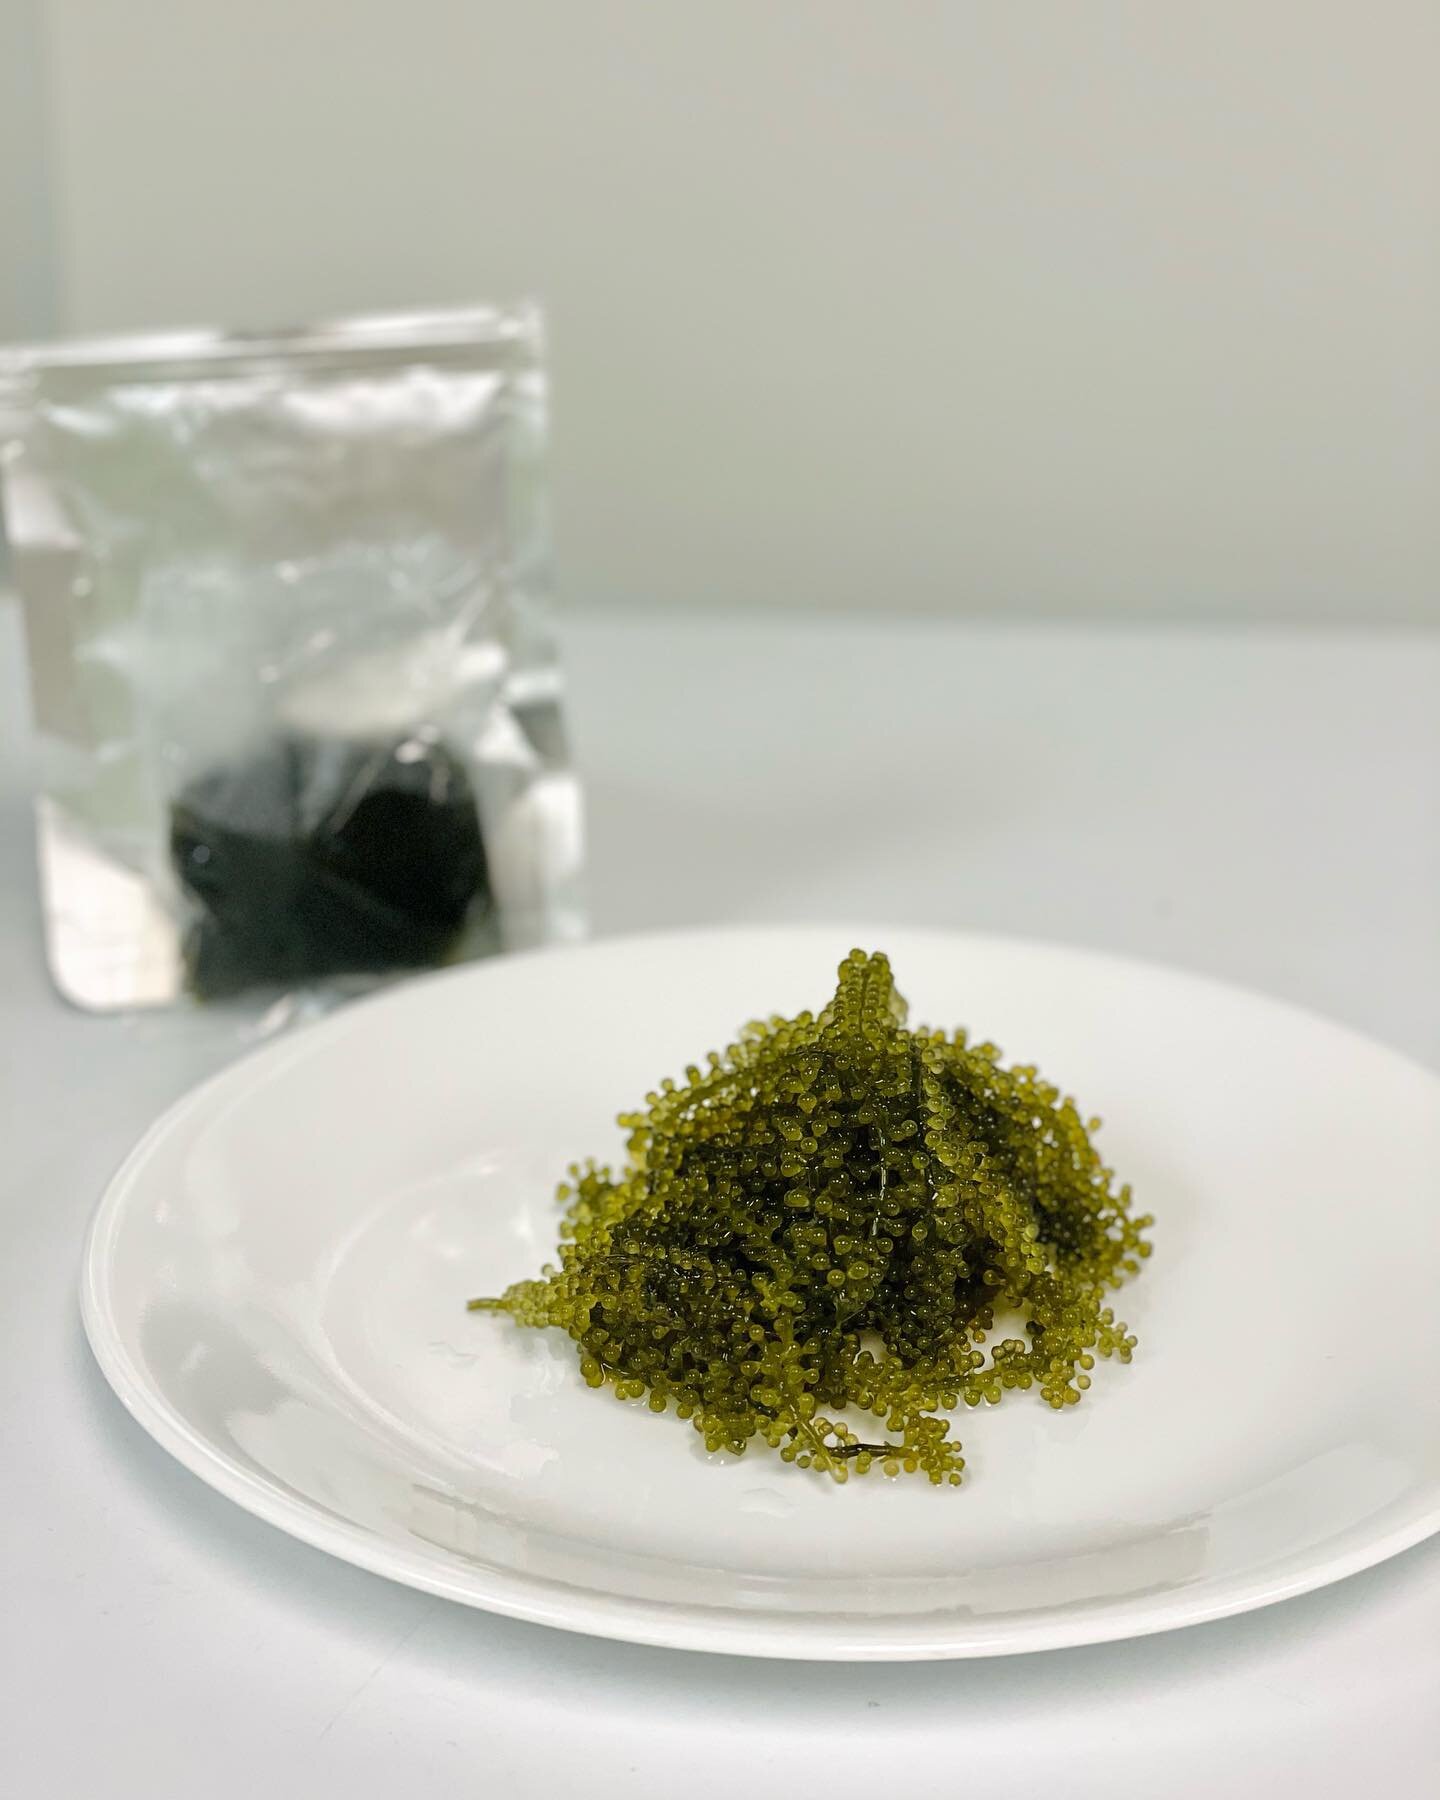 🌊Umibudo (Sea Grapes): This delicious and fun food only can survive in this sea area. 💫 It has powerful health benefits and anti-aging abilities.

They grow in the waters of western pacific all the way from Vietnam to Okinawa in the north.

☎️ 713-